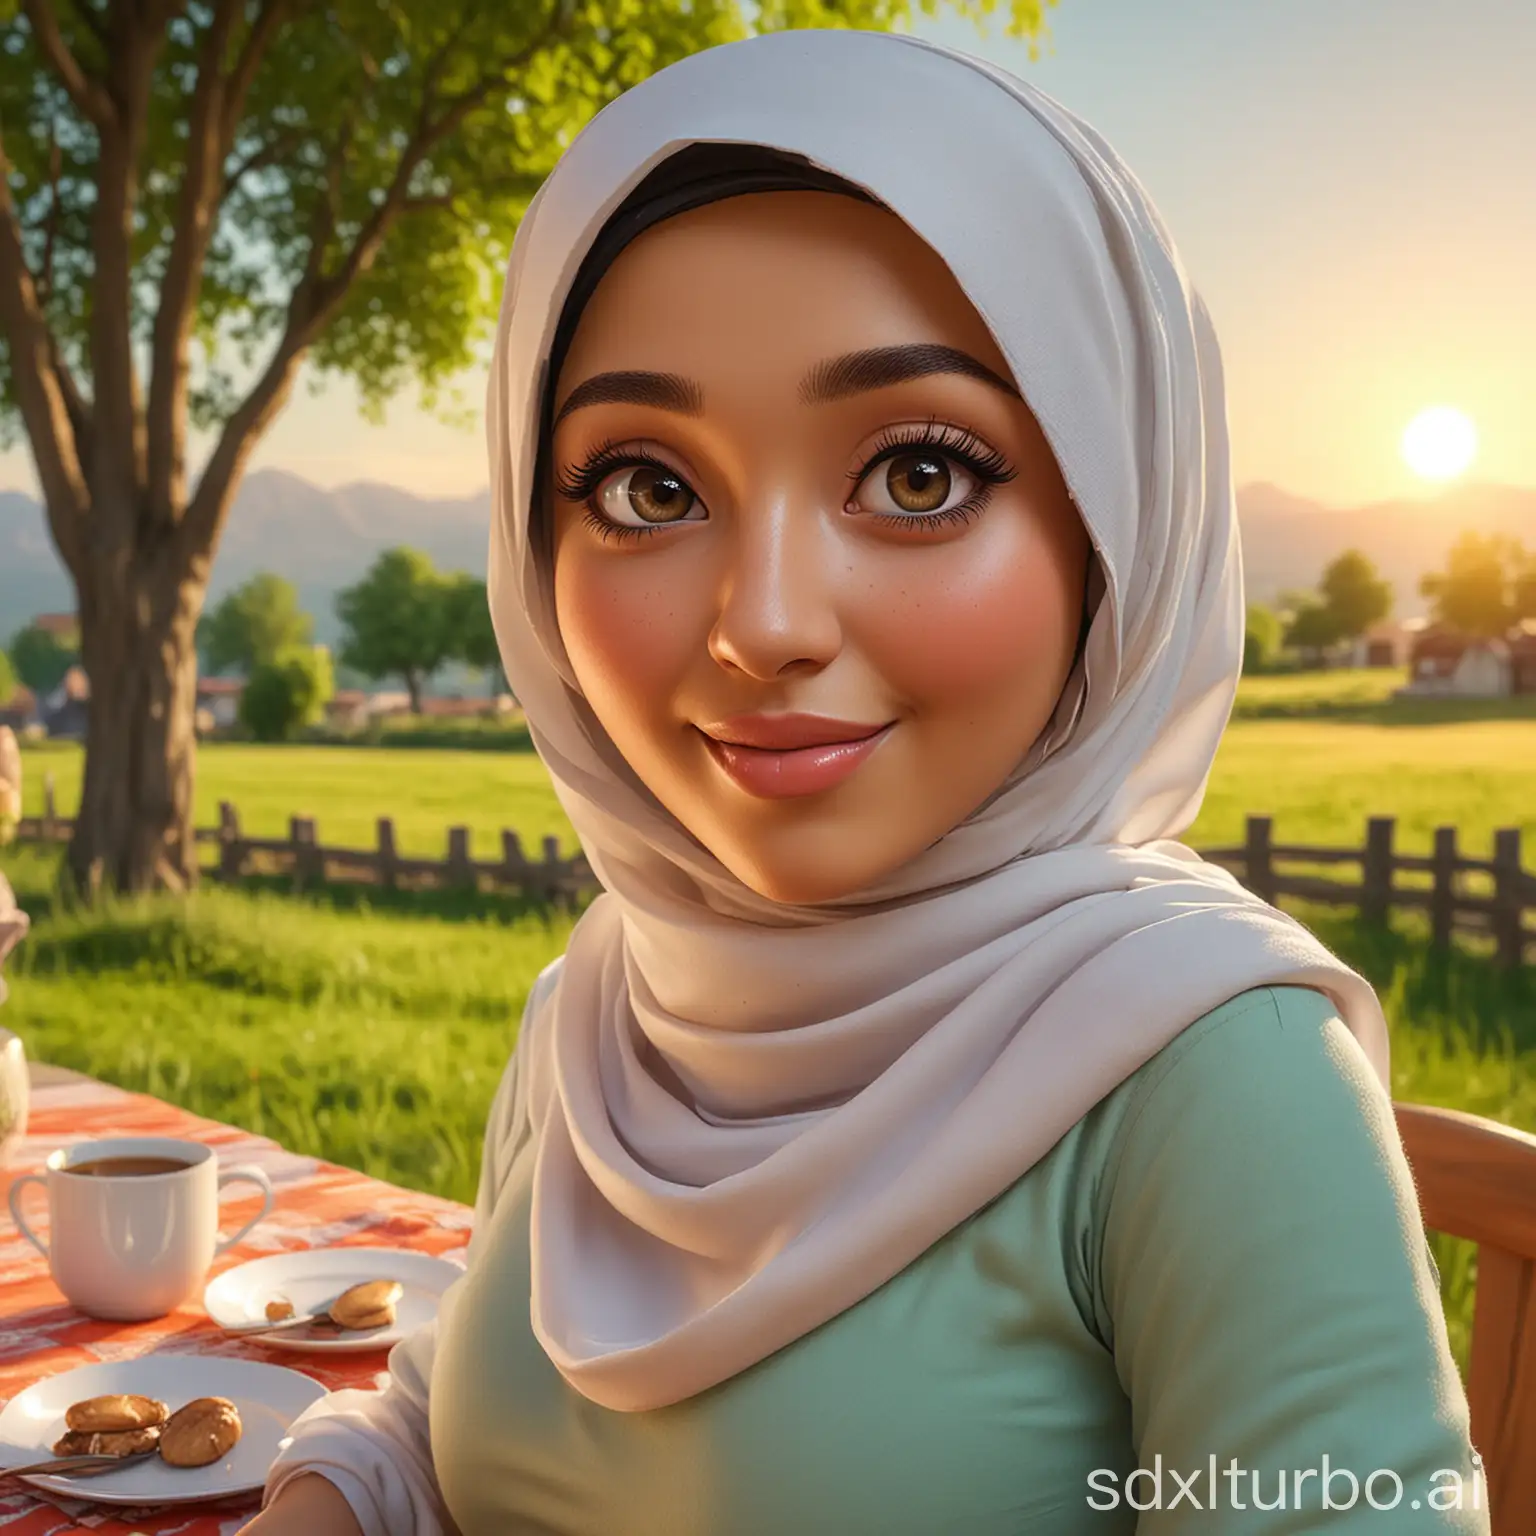 Caricatur3D beautiful woman with hijab, Art, mature body, large chest, beautiful big eyes, gentle smile, pretty face, pretty woman sitting at table on green meadow, traditional beauty, sunset moment, in field, in countryside, pretty woman, with setting sun, wearing long soft dress, muslim, with hijab, pretty woman, with beautiful appearance, very beautiful art, artistic, good lighting, bright colors, clear lines, curvy body, wide hips, thick arms, big thighs, 3D Caricature, Realistic-Cartoon-Style-3D-Caricature